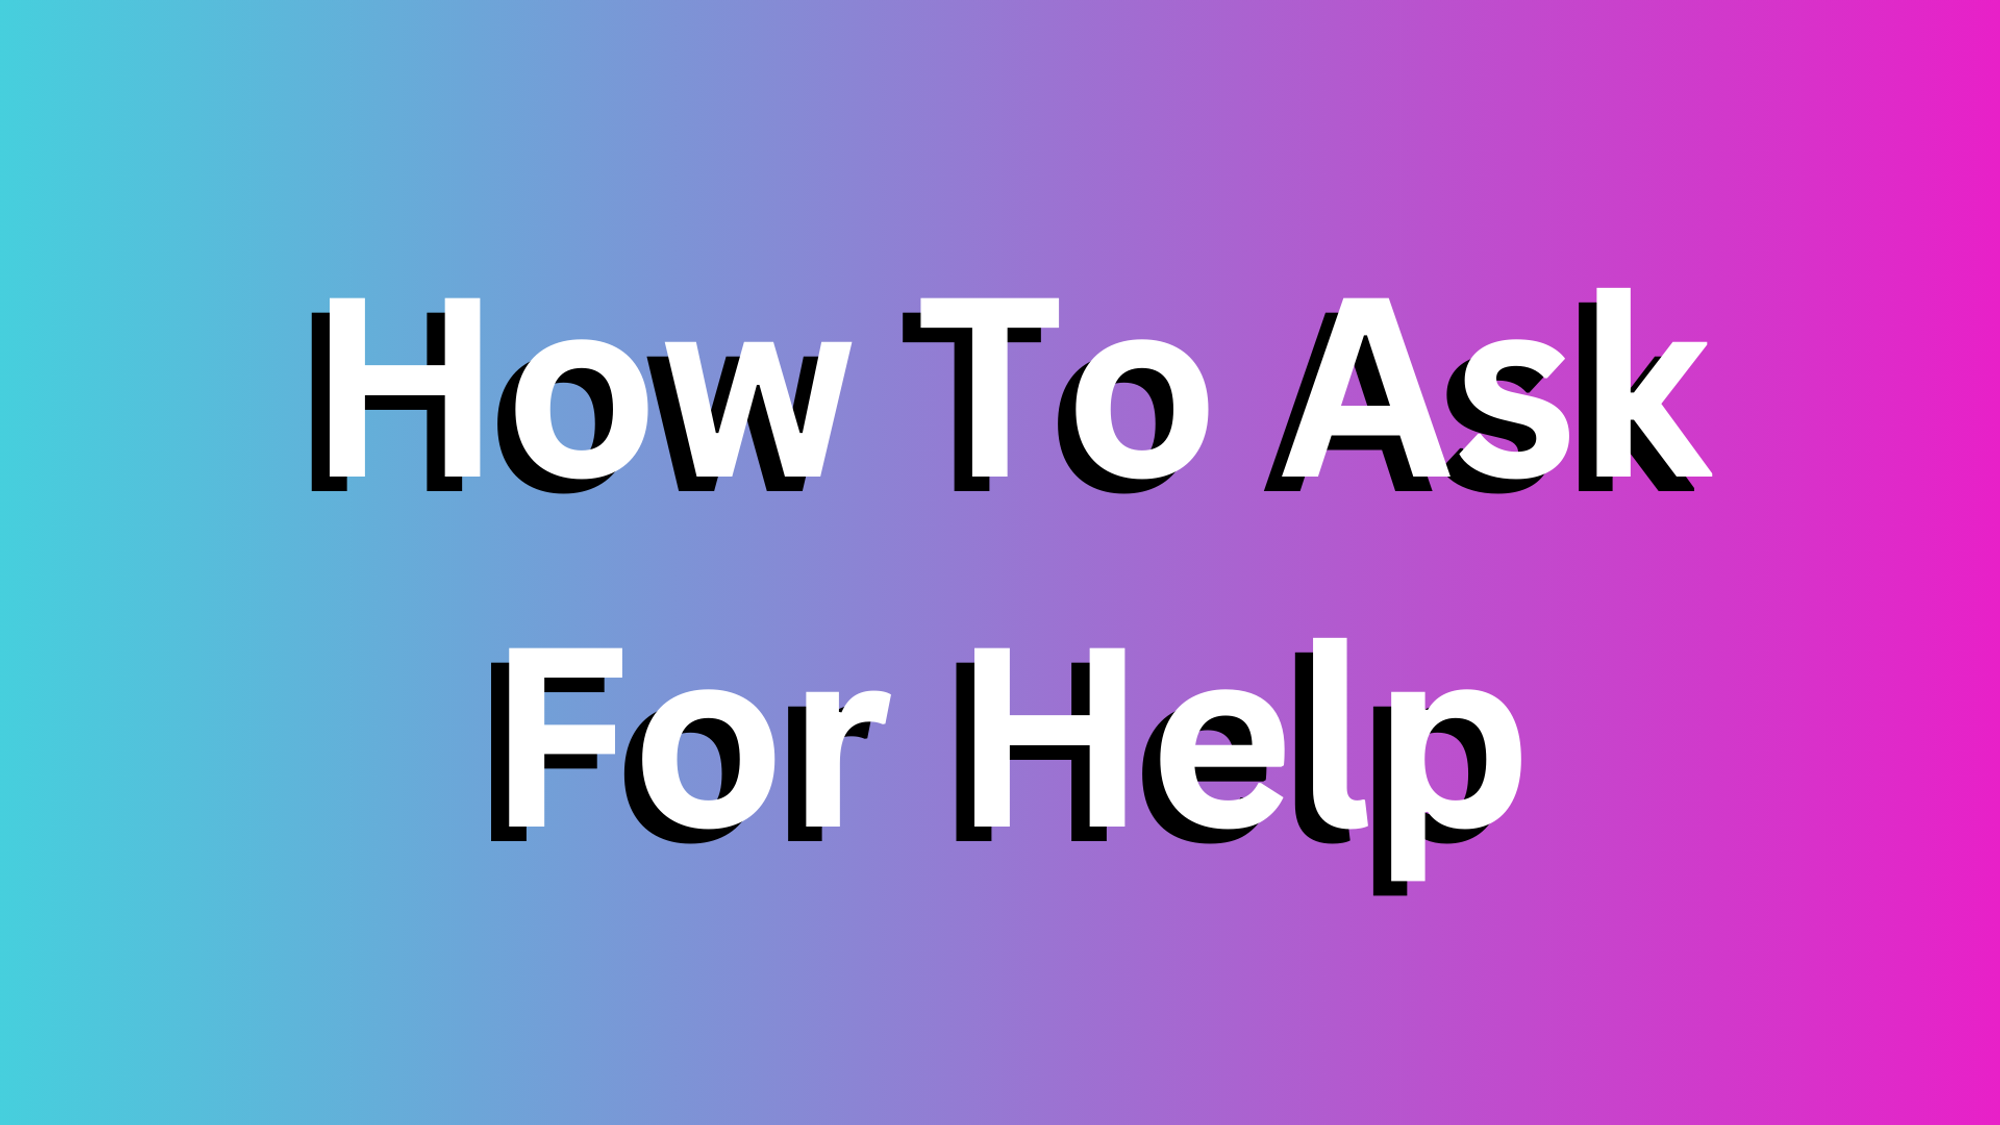 How To Ask For Help The Right Way